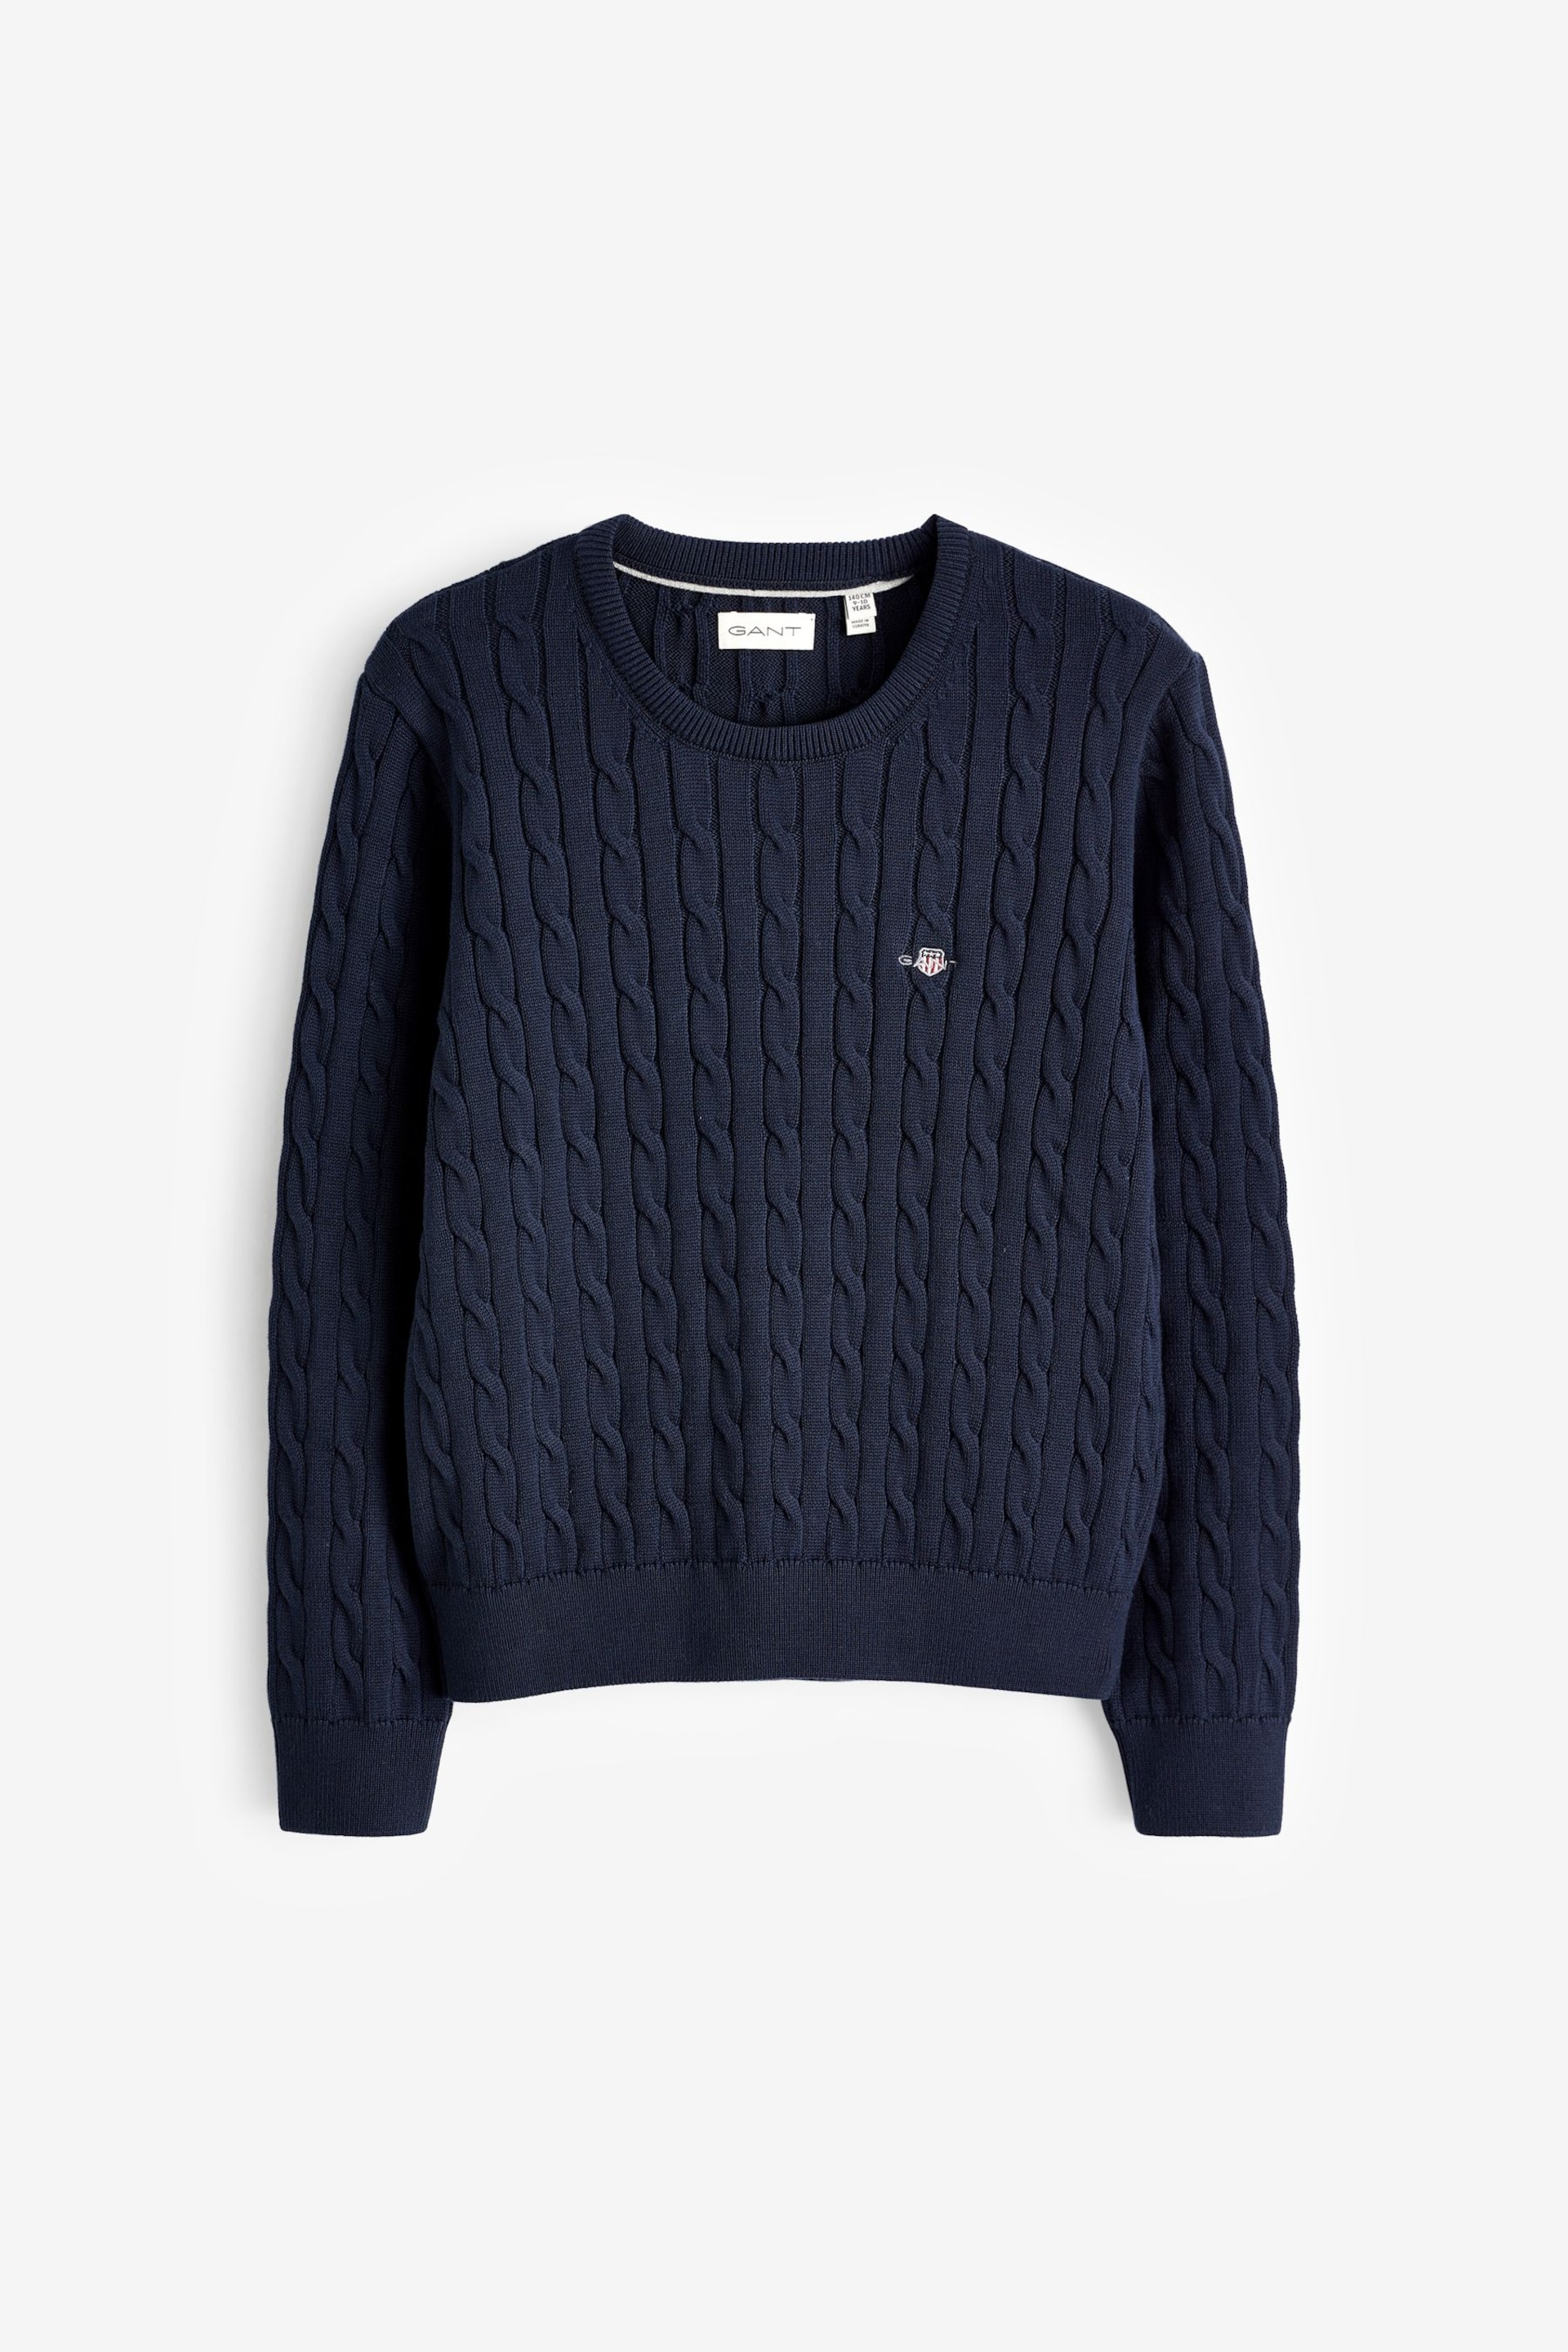 GANT Blue Teens Shield Cotton Cable Knit Crew Neck Sweater - Image 5 of 5